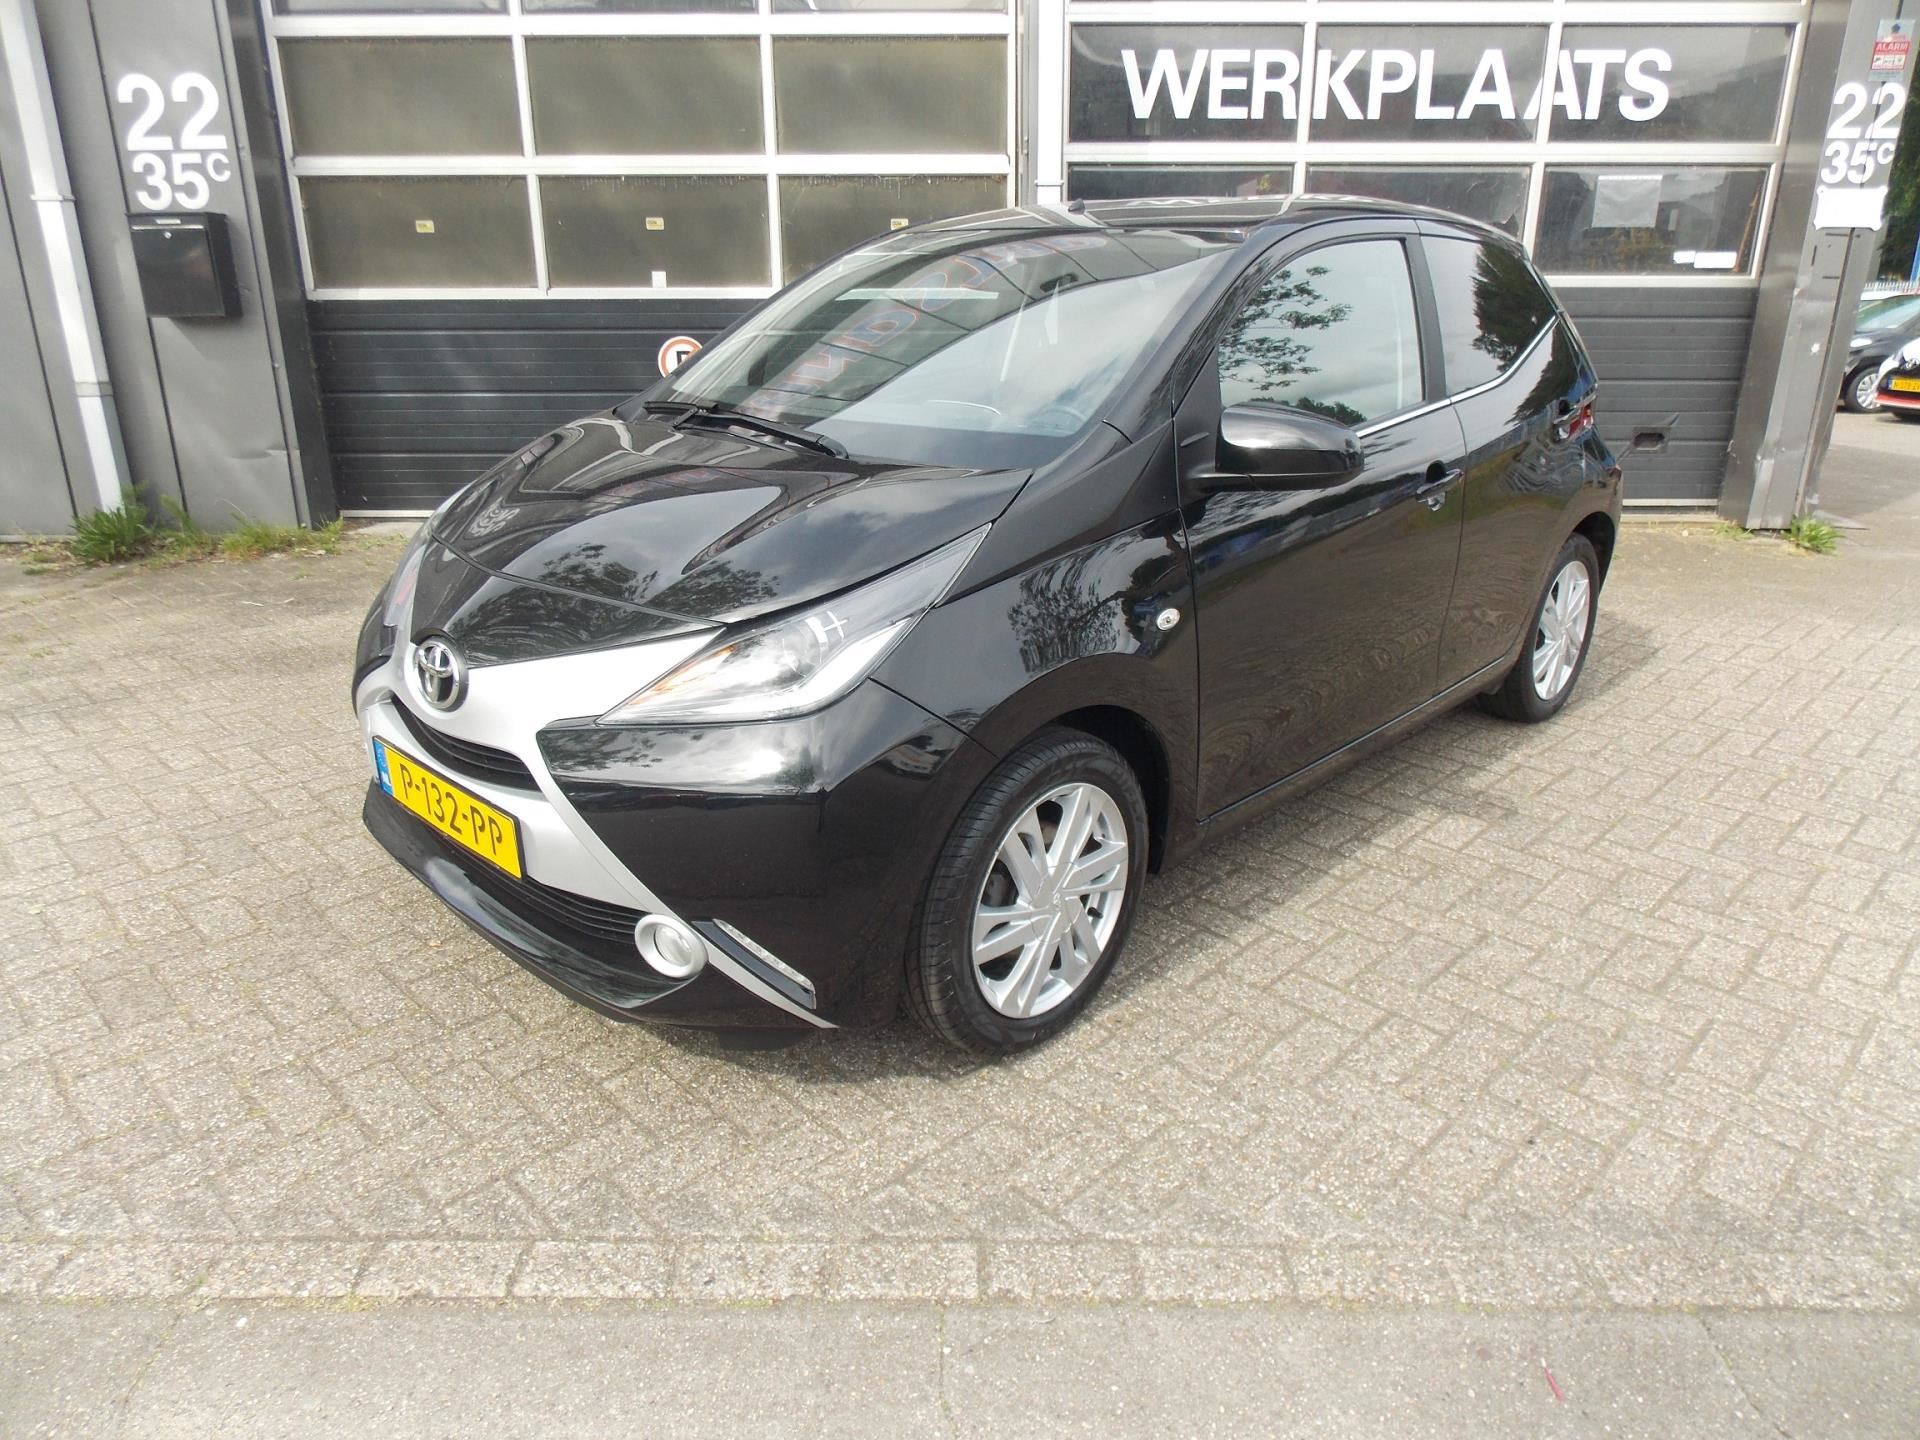 Toyota Aygo occasion - Randstad Cars